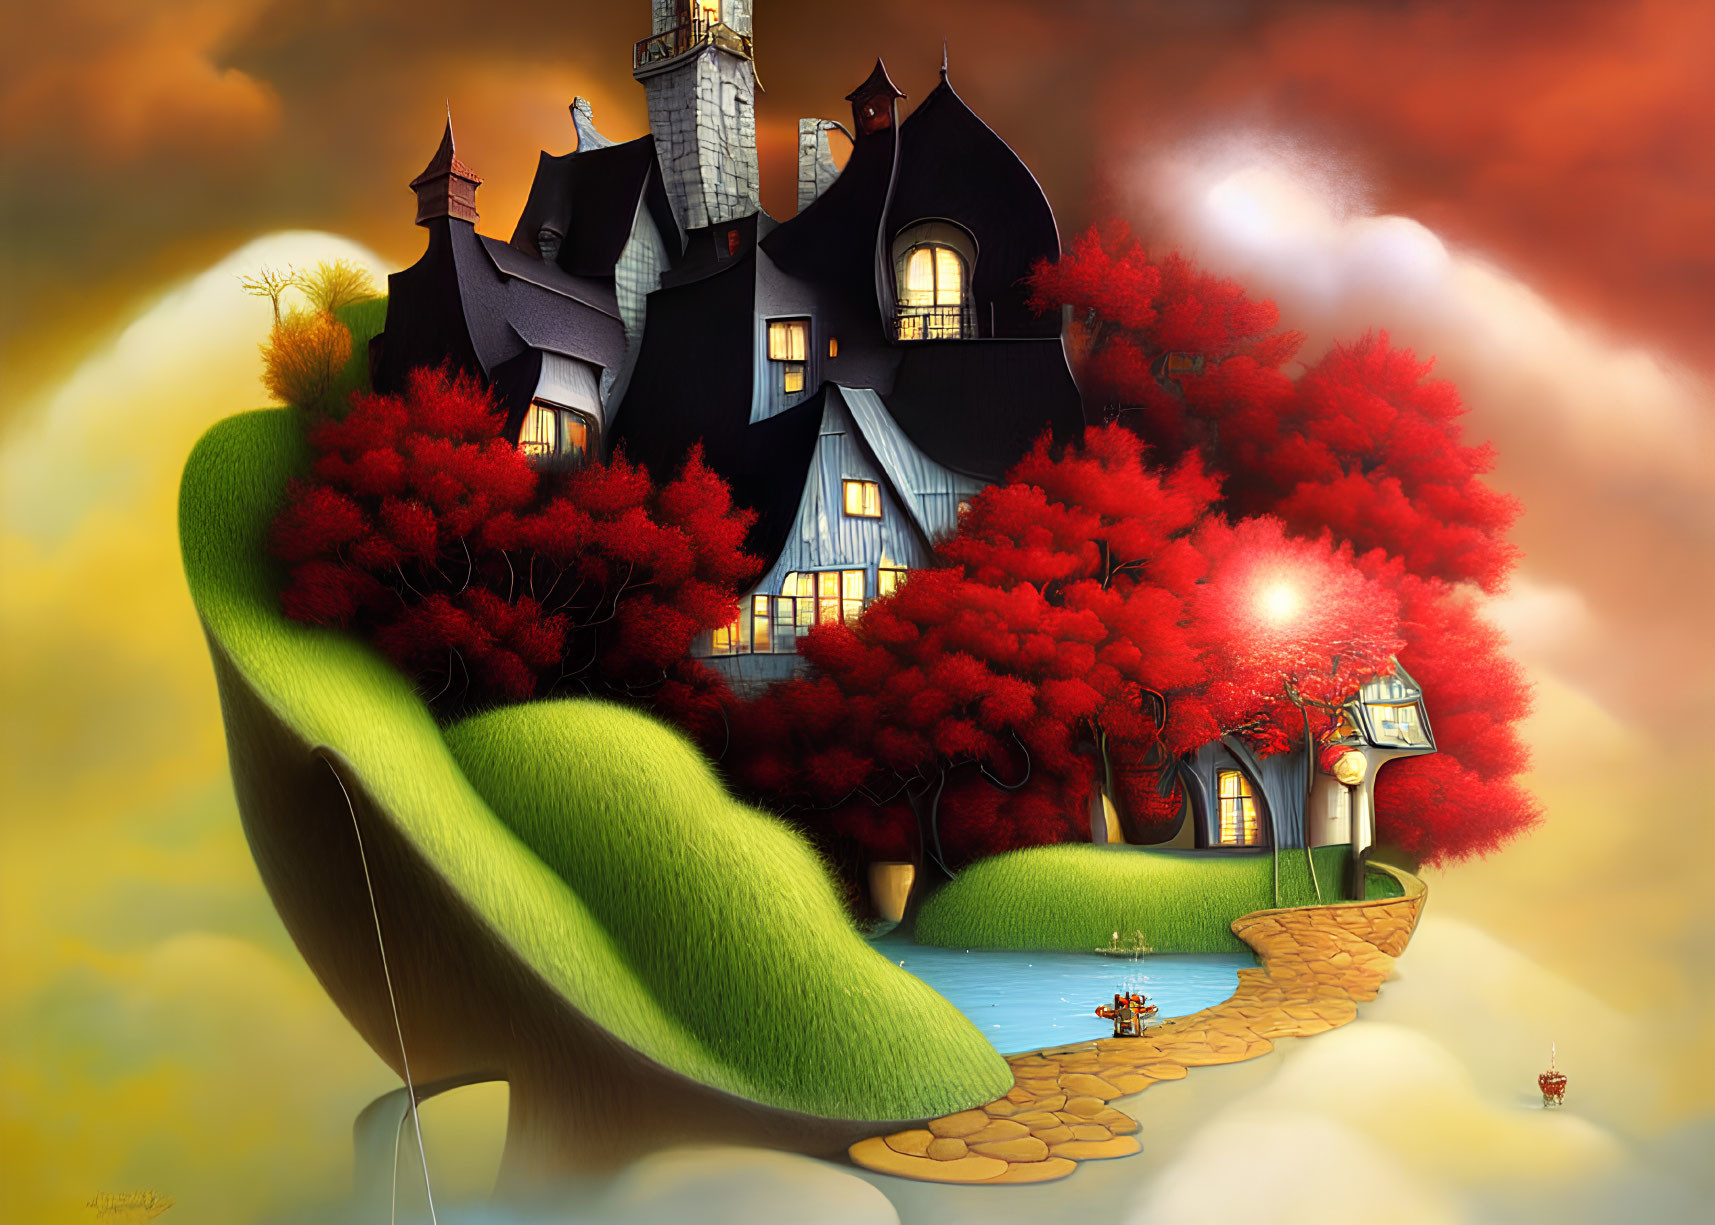 Whimsical house with red trees on floating island under sunset sky